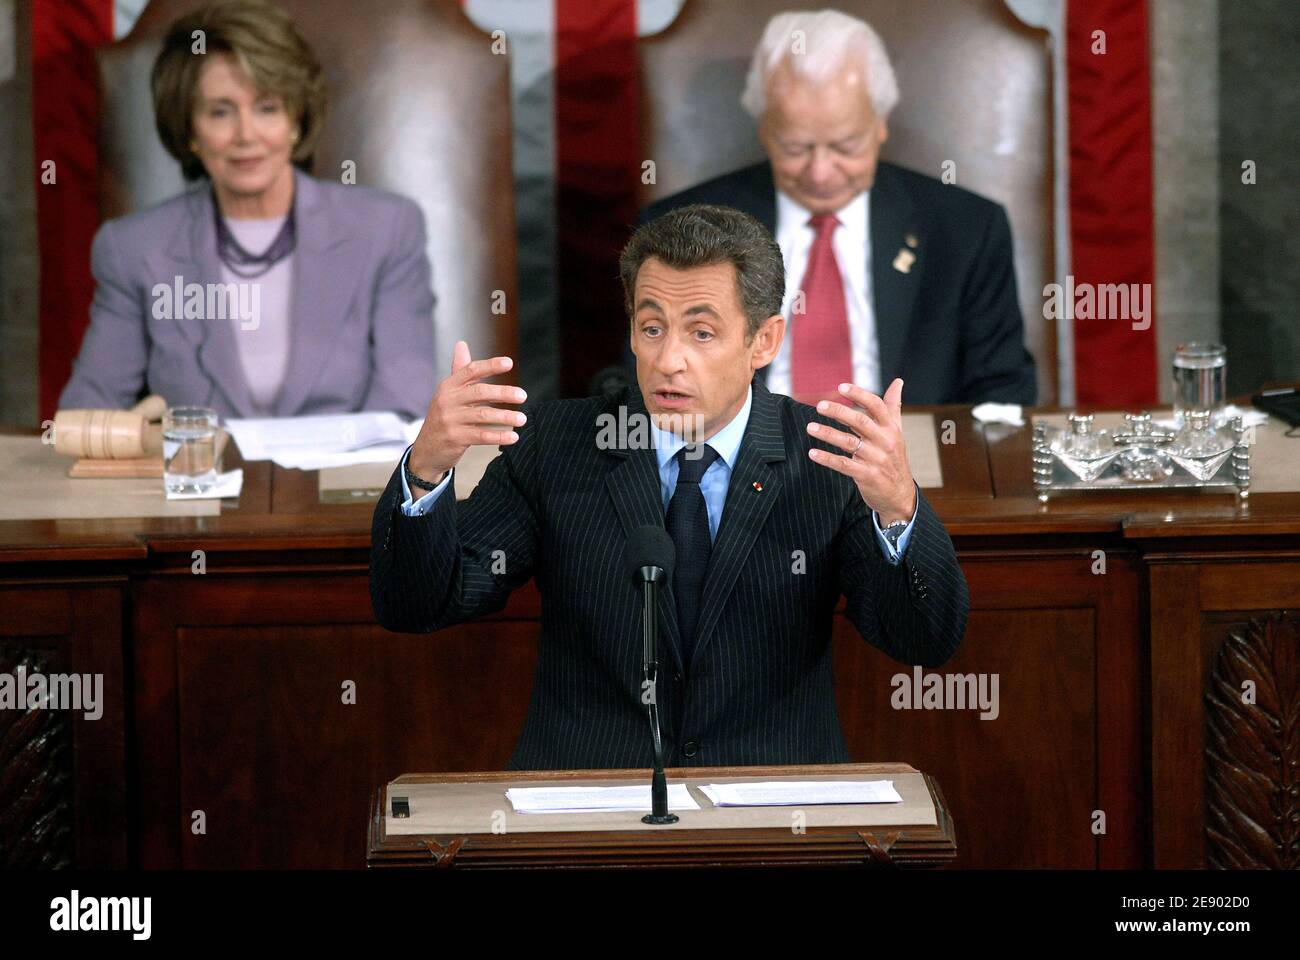 French President Nicolas Sarkozy addresses the US Congress in Washington, DC, USA, on November 2007. Sarkozy's address to Congress, the first by a French leader in eleven years, comes amid improved relations between both countries. US Speaker of the House Nancy Pelosi and Sen. Richard Byrd (D-WVA) are seen in the background. Photo by Olivier Douliery/ABACAPRESS.COM Stock Photo